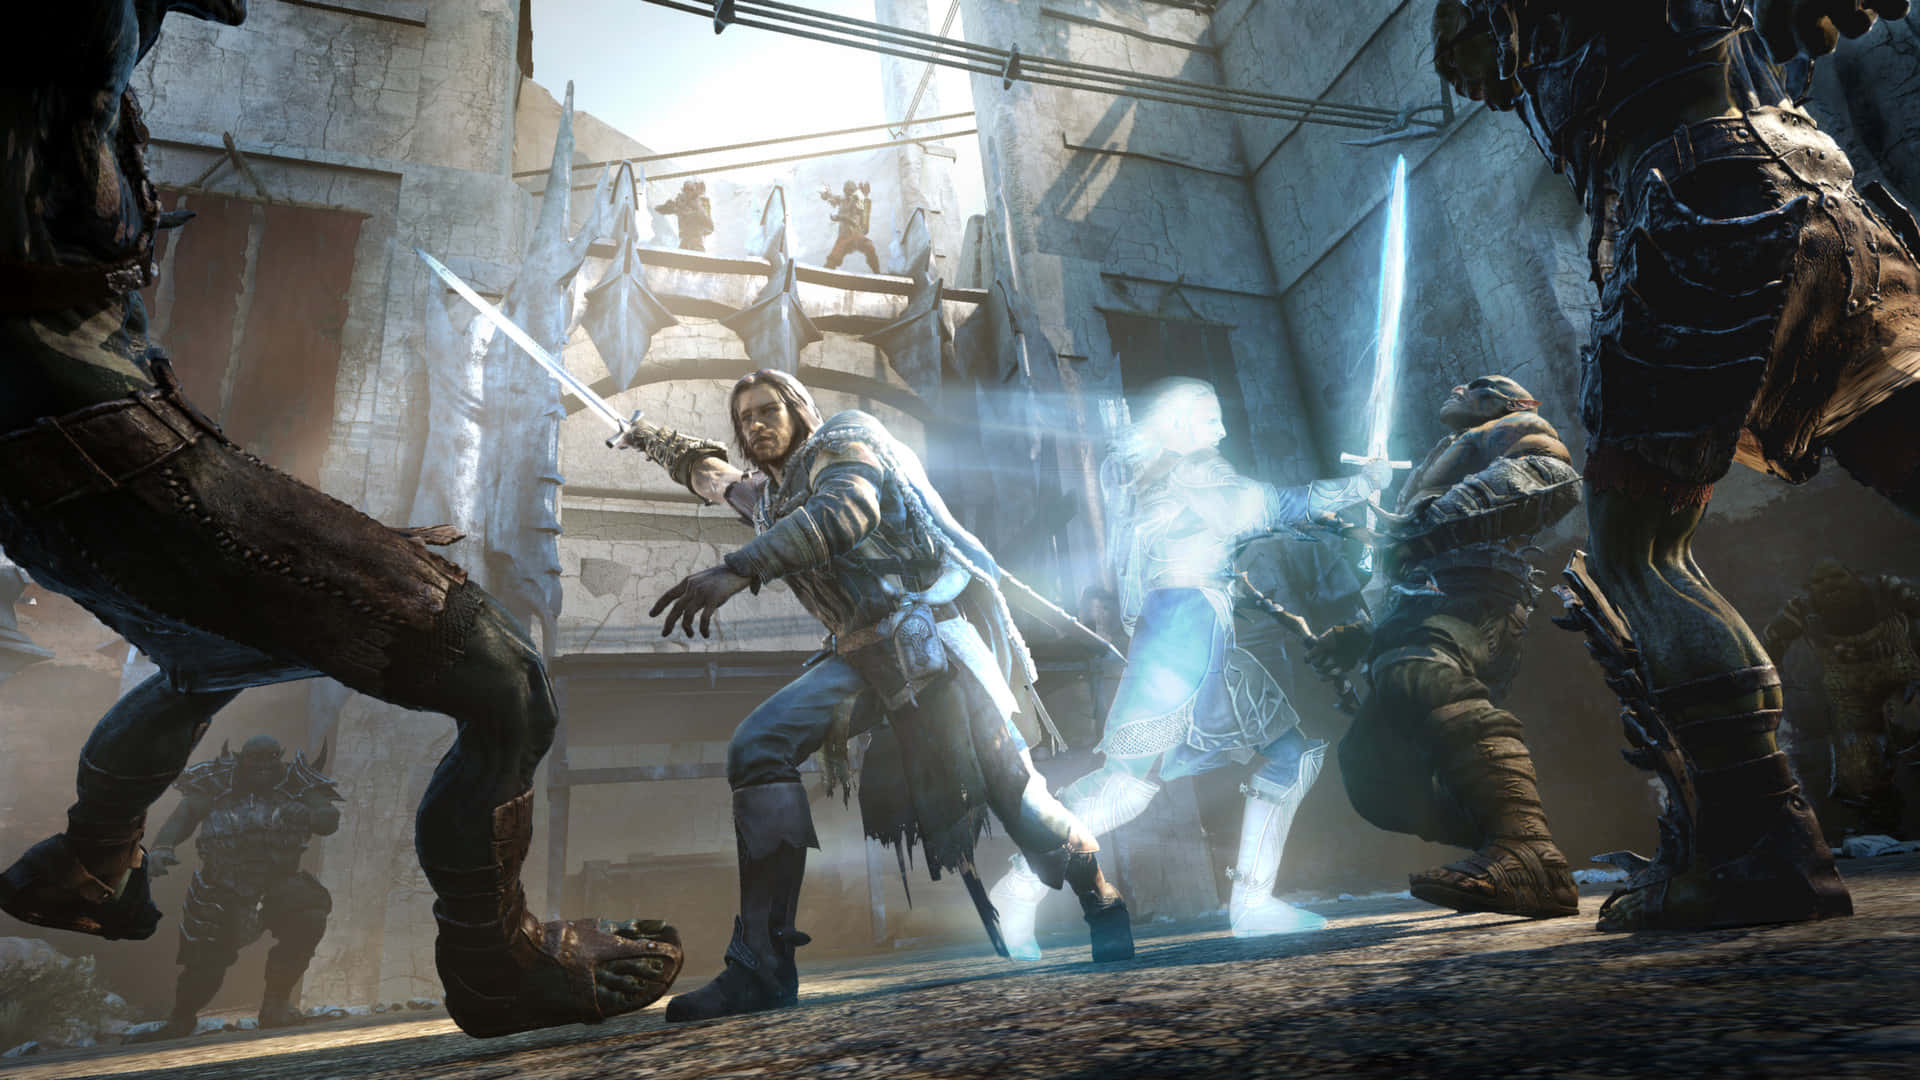 "Gather strength to take on Mordor in Middle-earth in Shadow of Mordor"